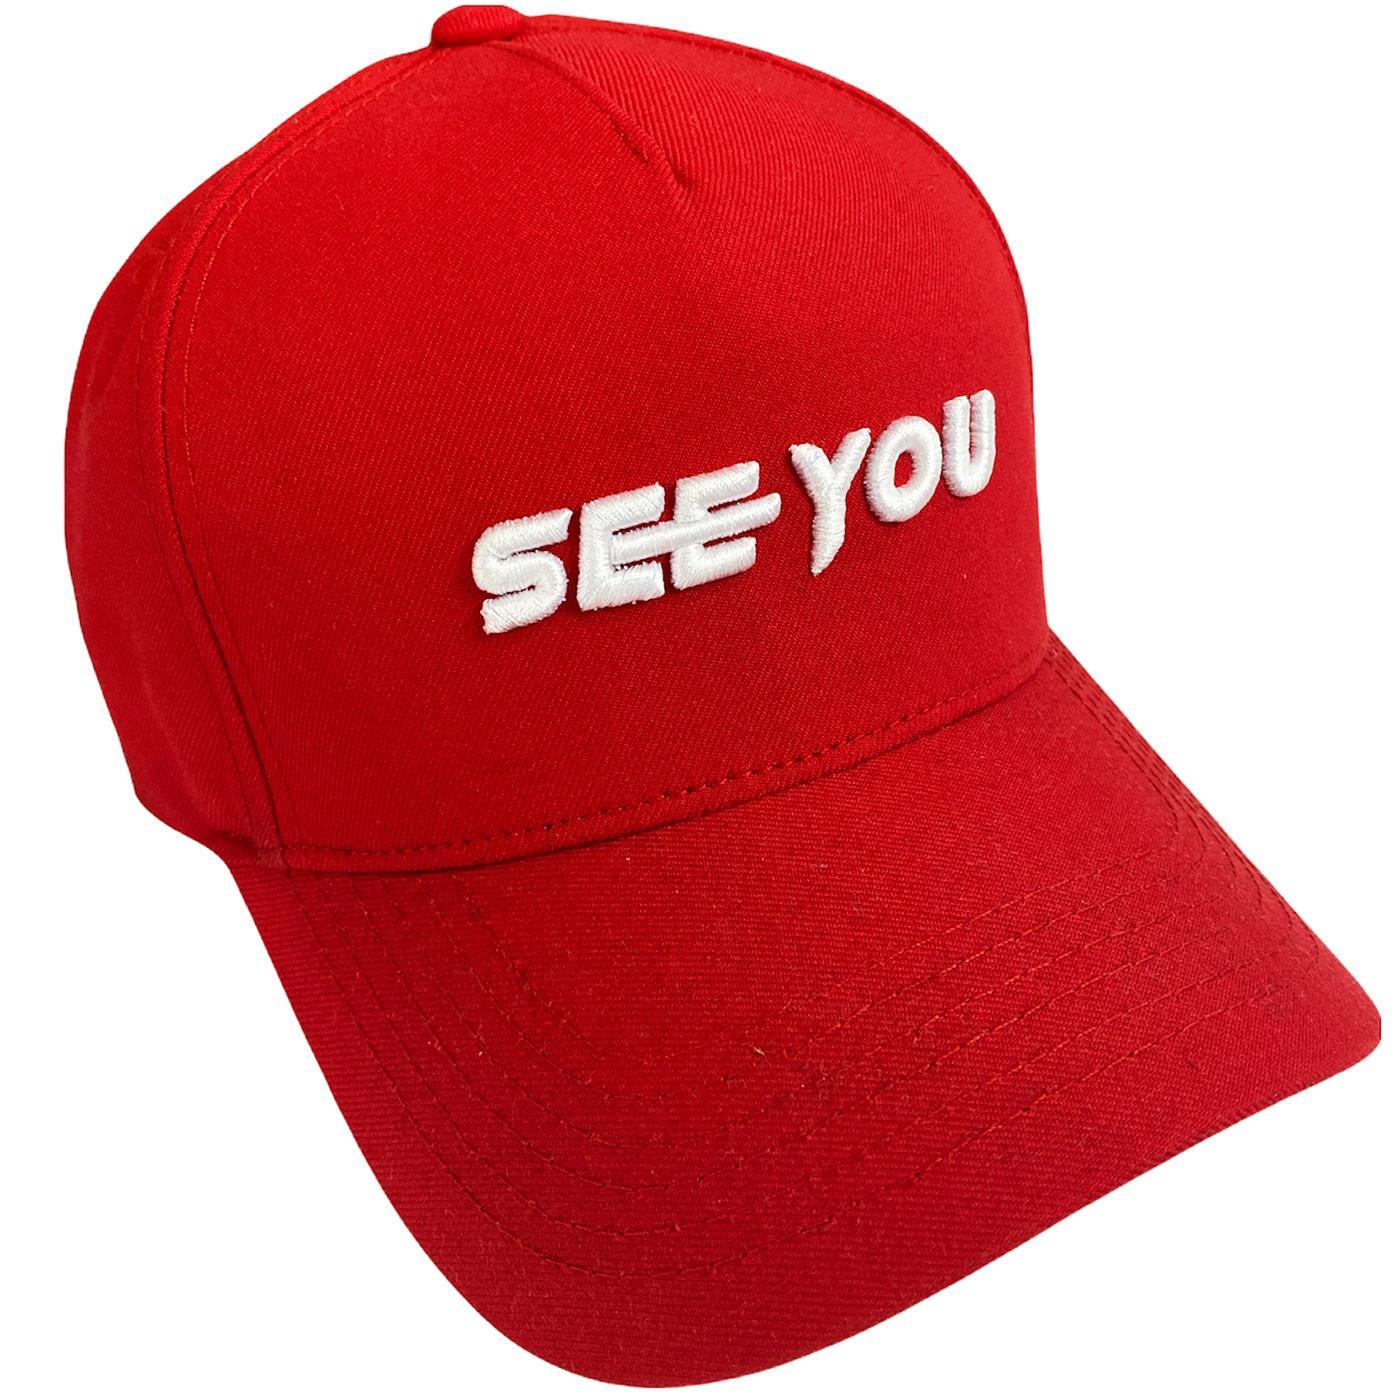 See You Vision Hat (Red/White) | See You